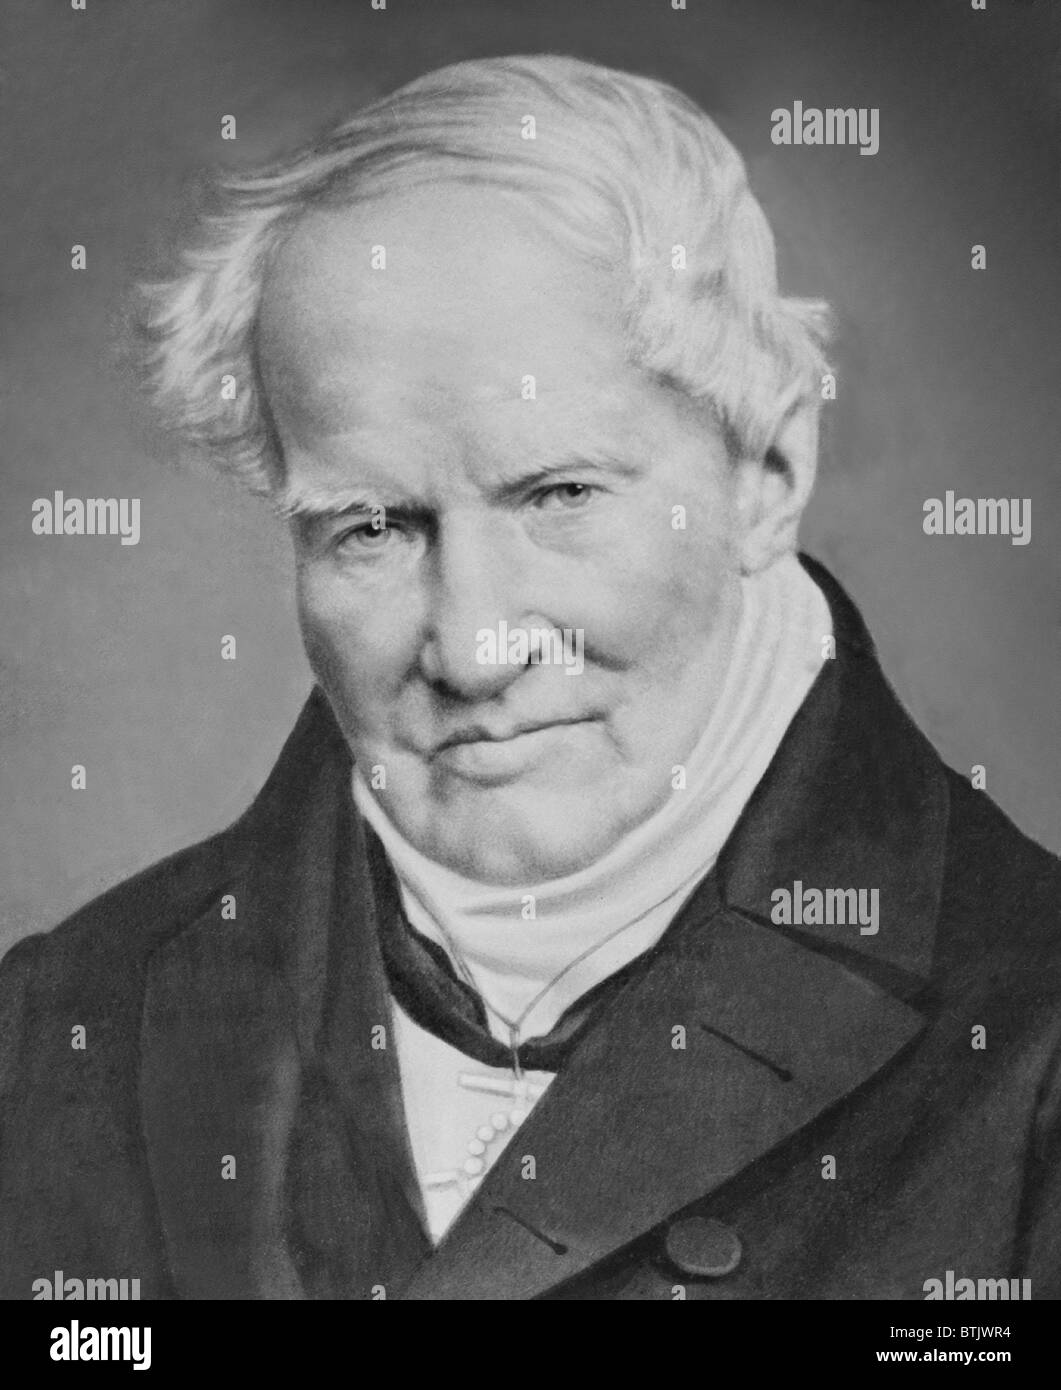 Alexander von Humboldt (1769-1859) German scientist and explorer of Central and South America from 1799 to 1804. In his later years, he wrote 'Kosmos' to unify scientific knowledge. 1860 portrait. Stock Photo